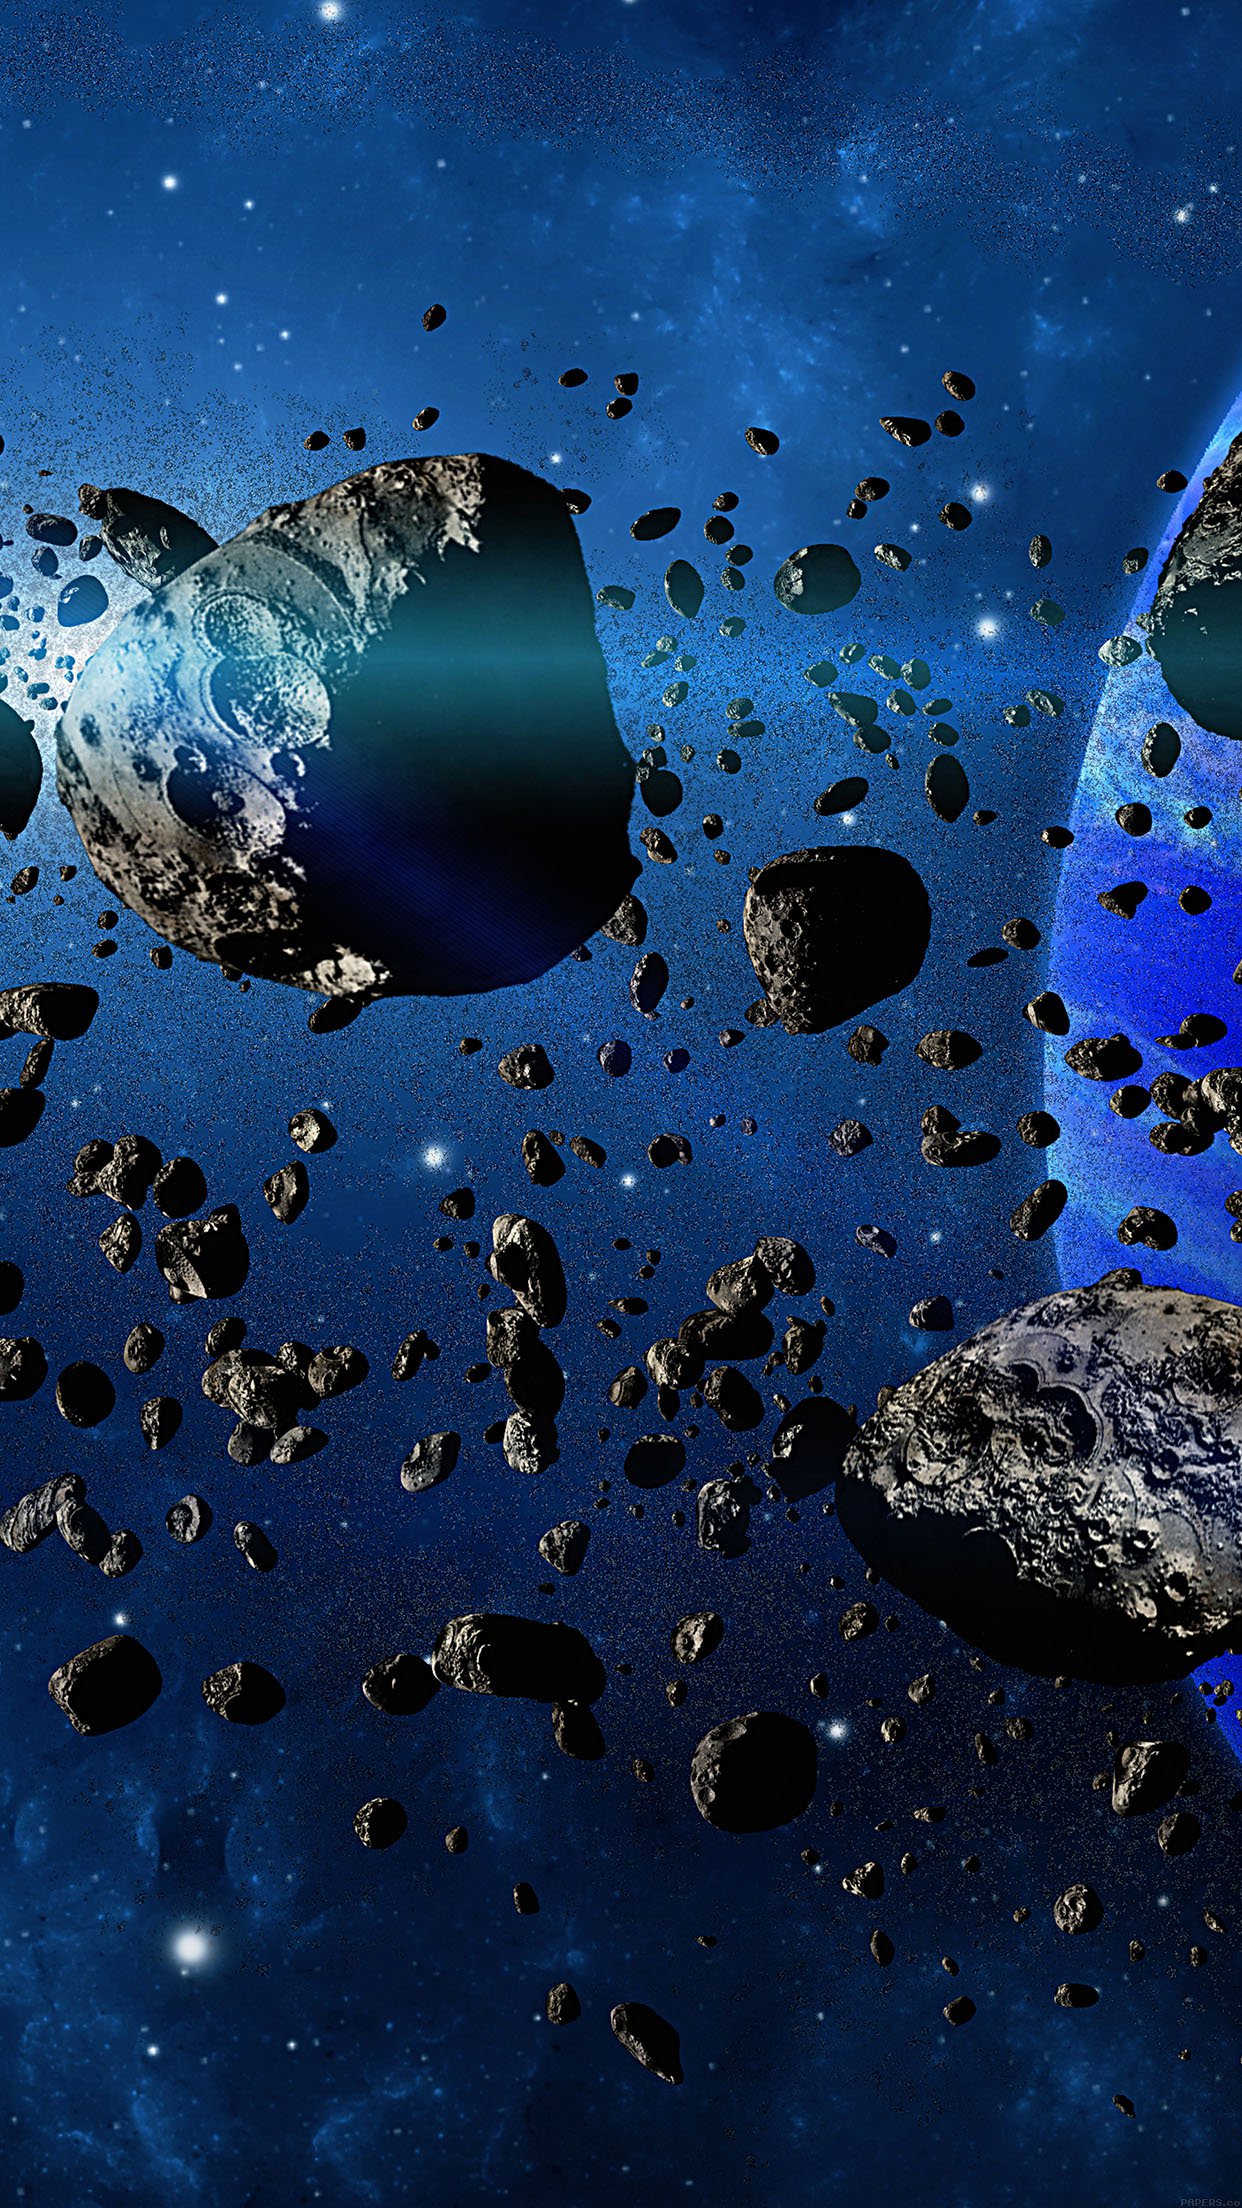 Wallpaper Rock Space Android wallpaper